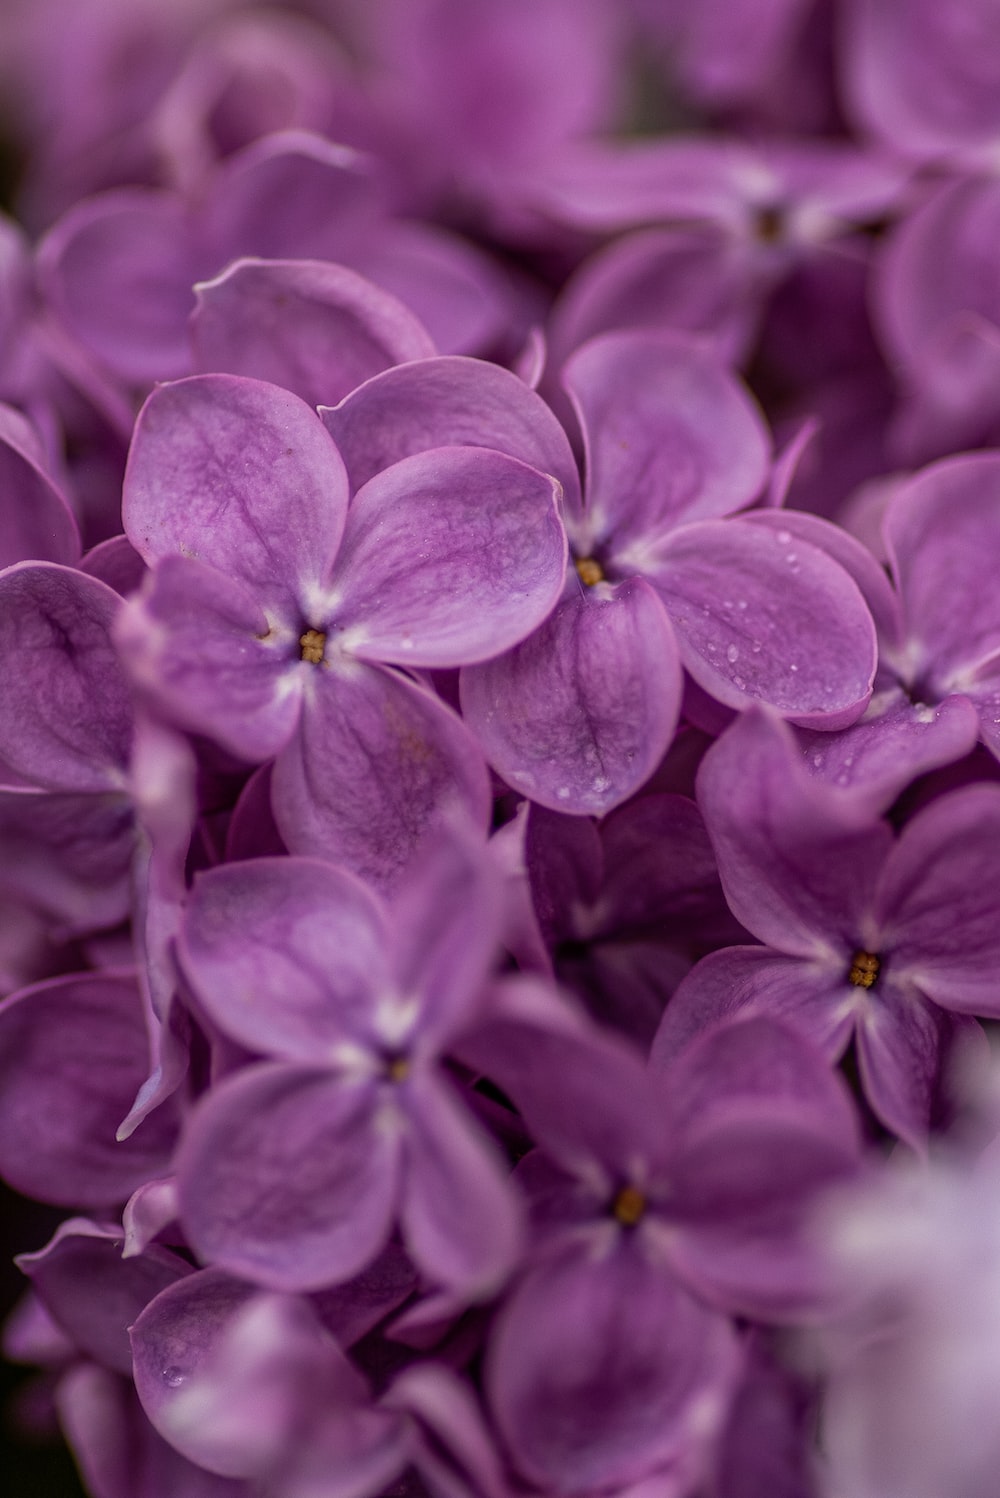 Violet Flowers Picture. Download Free Image